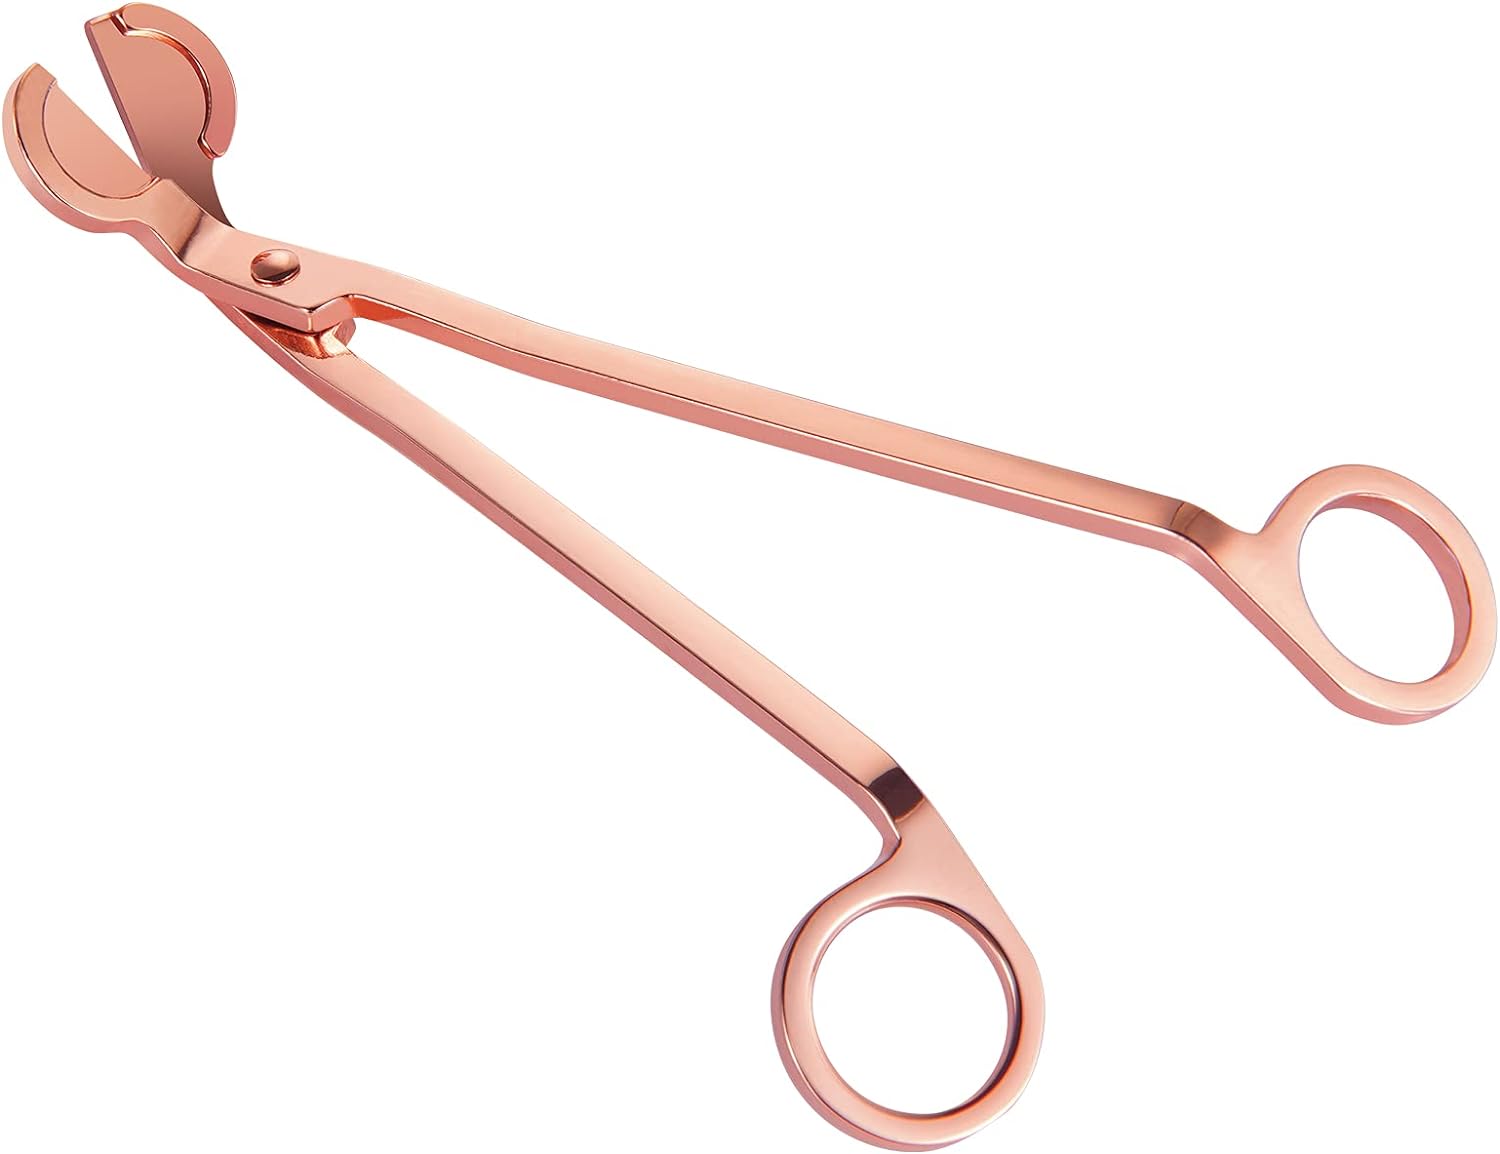 Candle Wick Trimmer, Candle Wick Cutter, Candle Scissors Cutter, Stainless Wick Clipper Scissor for Trim Wick to Burn Equally, Reduces Soot (Rose Gold)